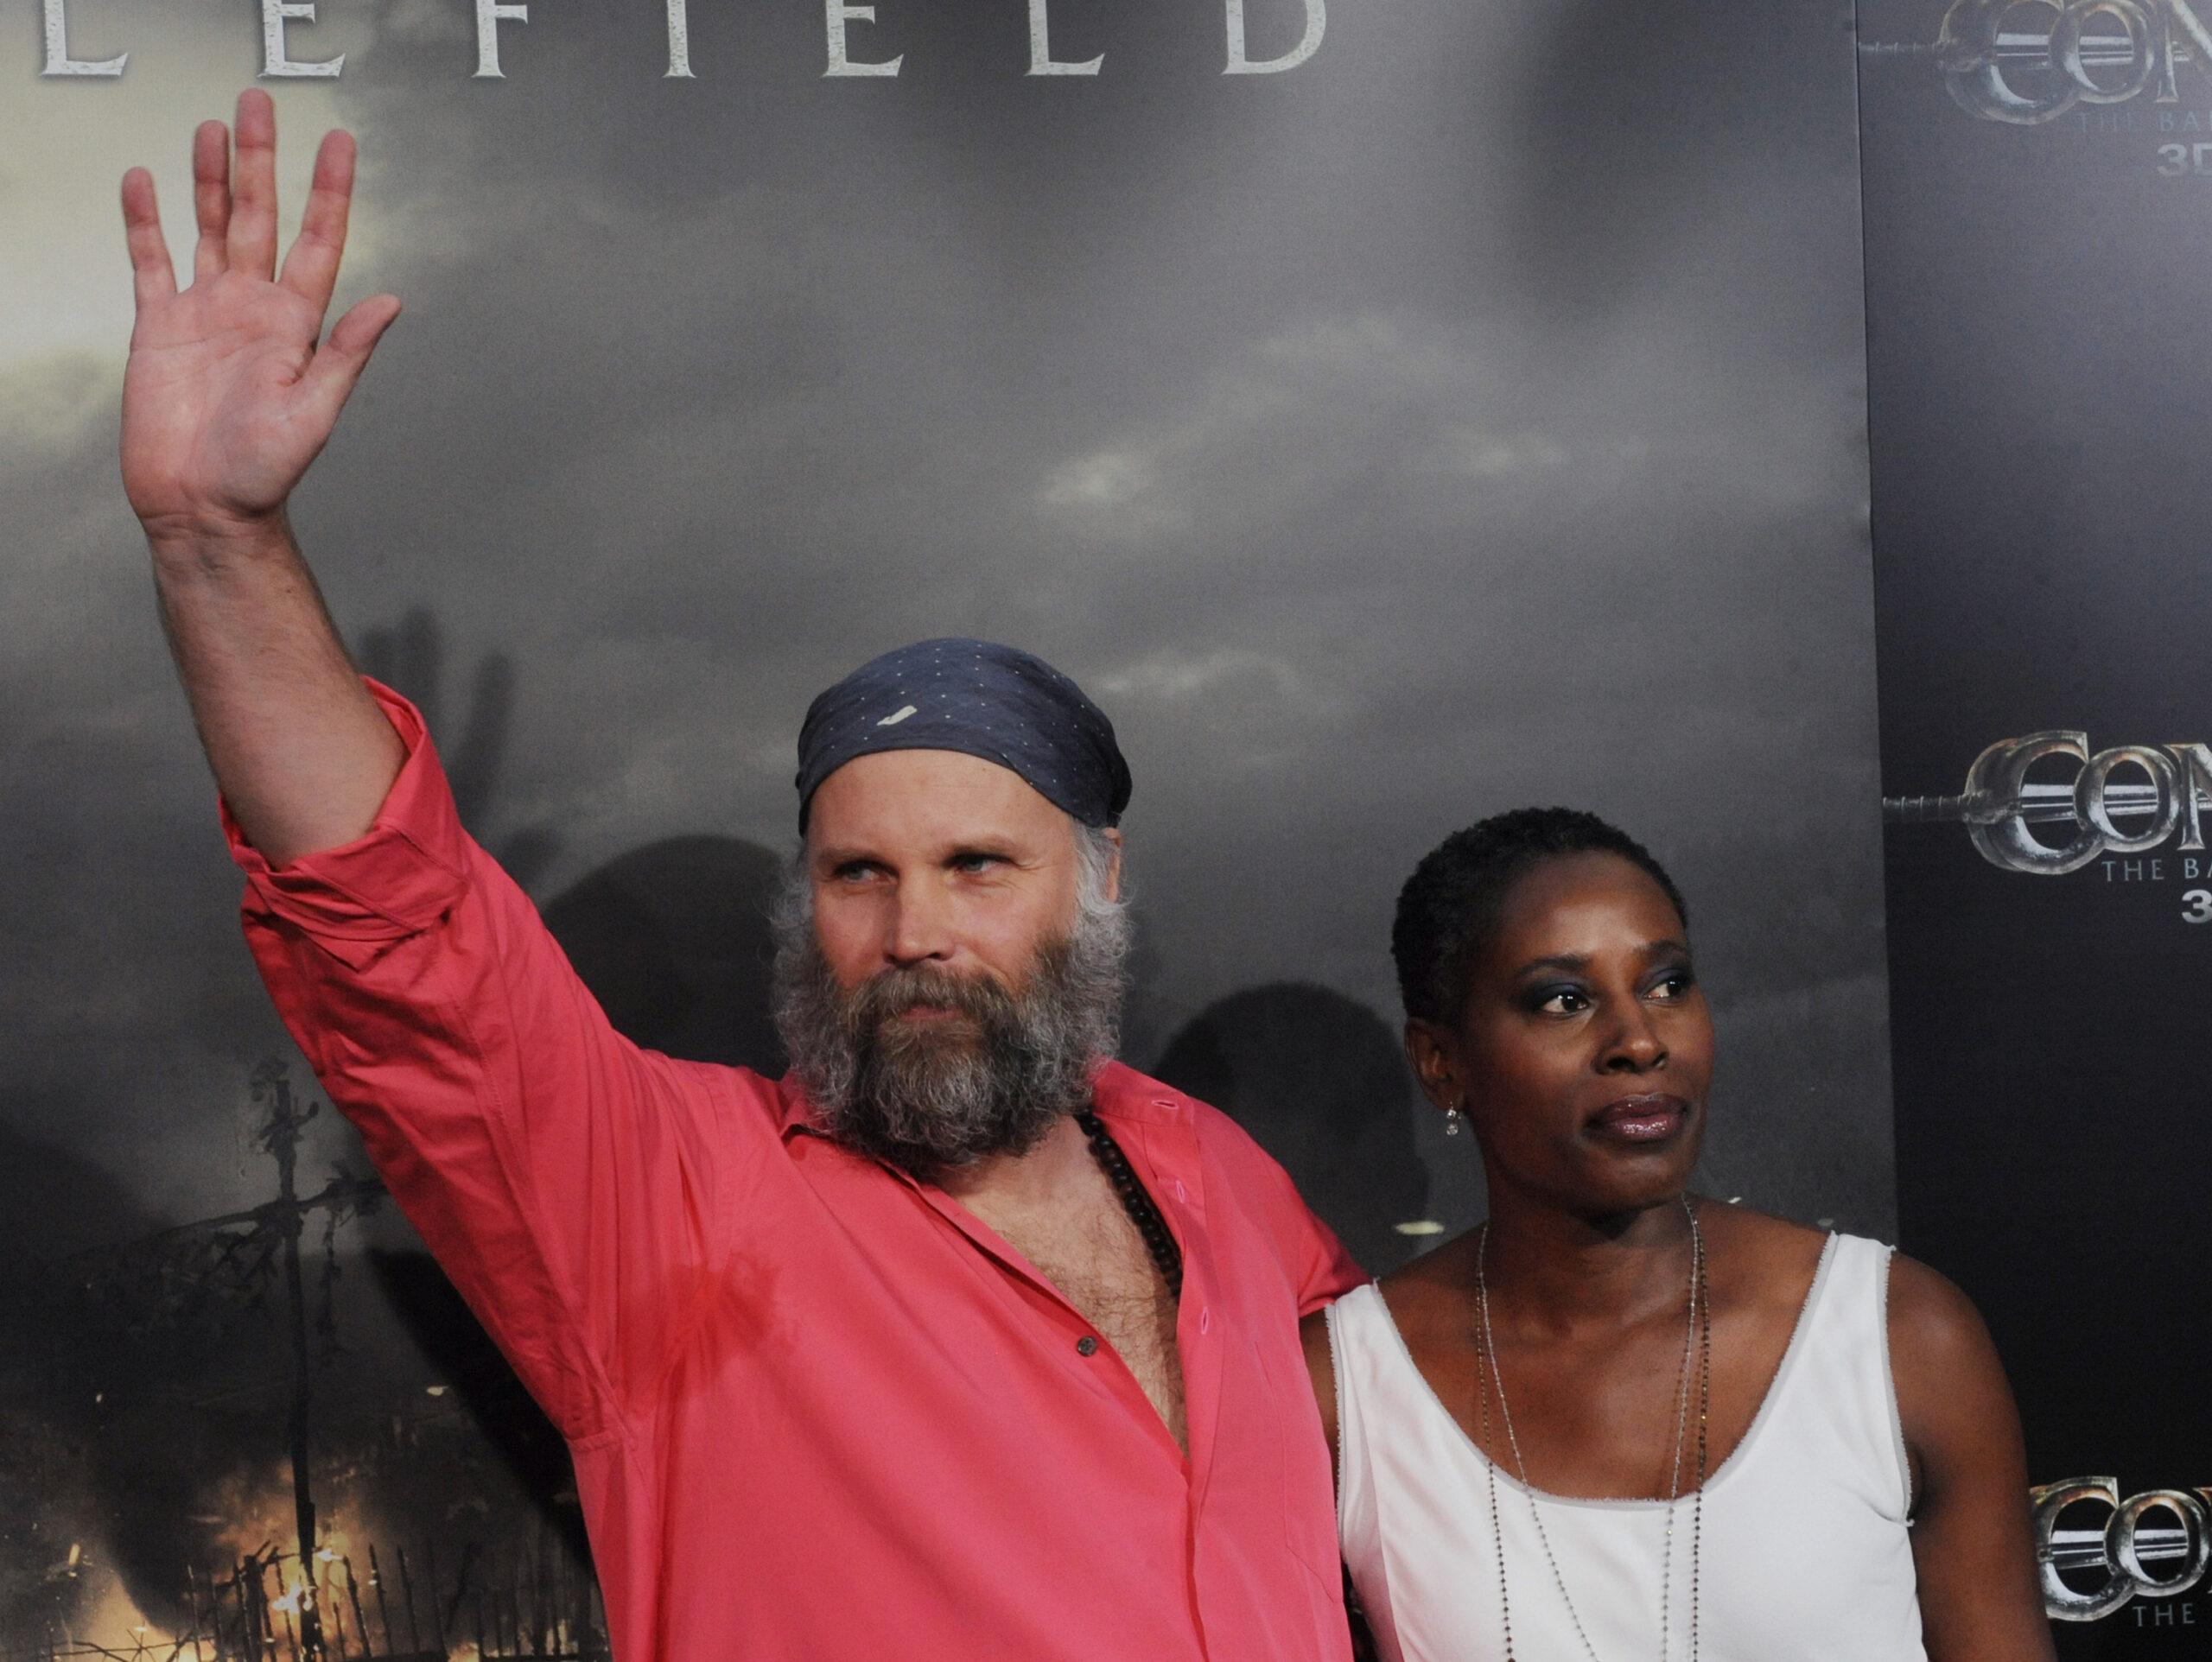 Marcus Nispel and Dyan Humes attend the premiere of "Conan the Barbarian" in Los Angeles